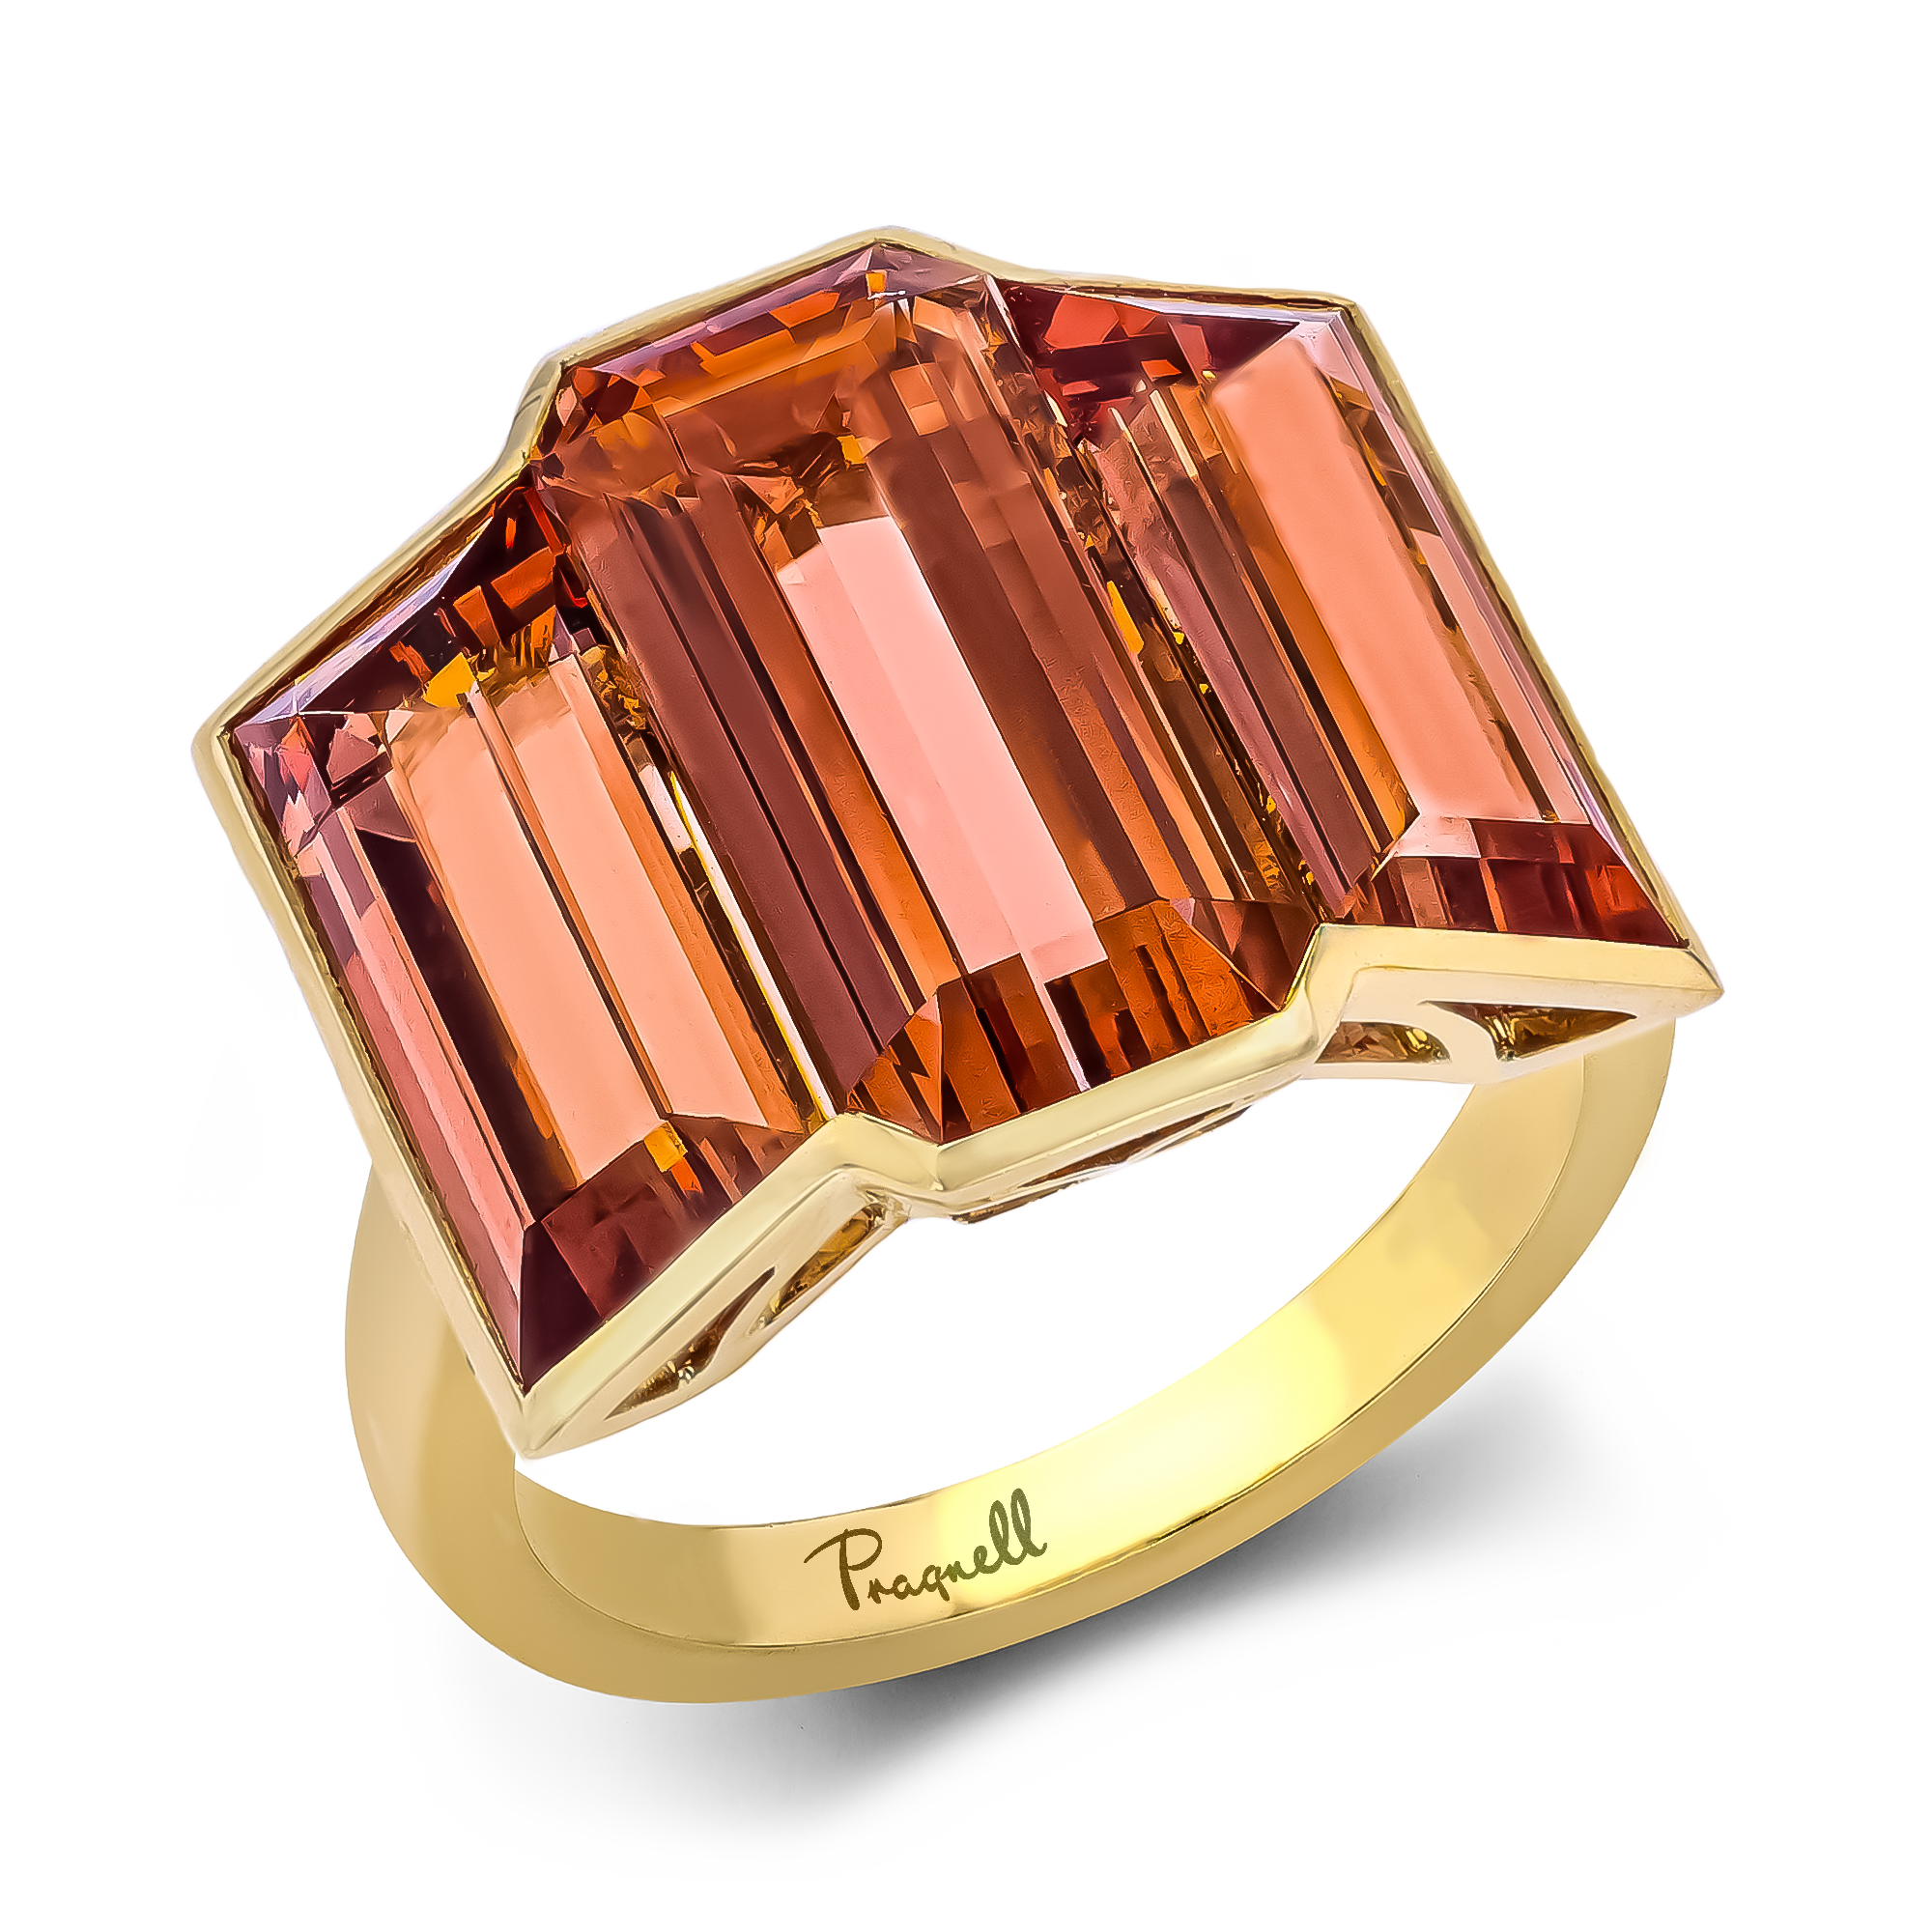 Masterpiece Kingdom 15.43ct Imperial Topaz Three Stone Ring Baguette Cut, Rubover Set_1